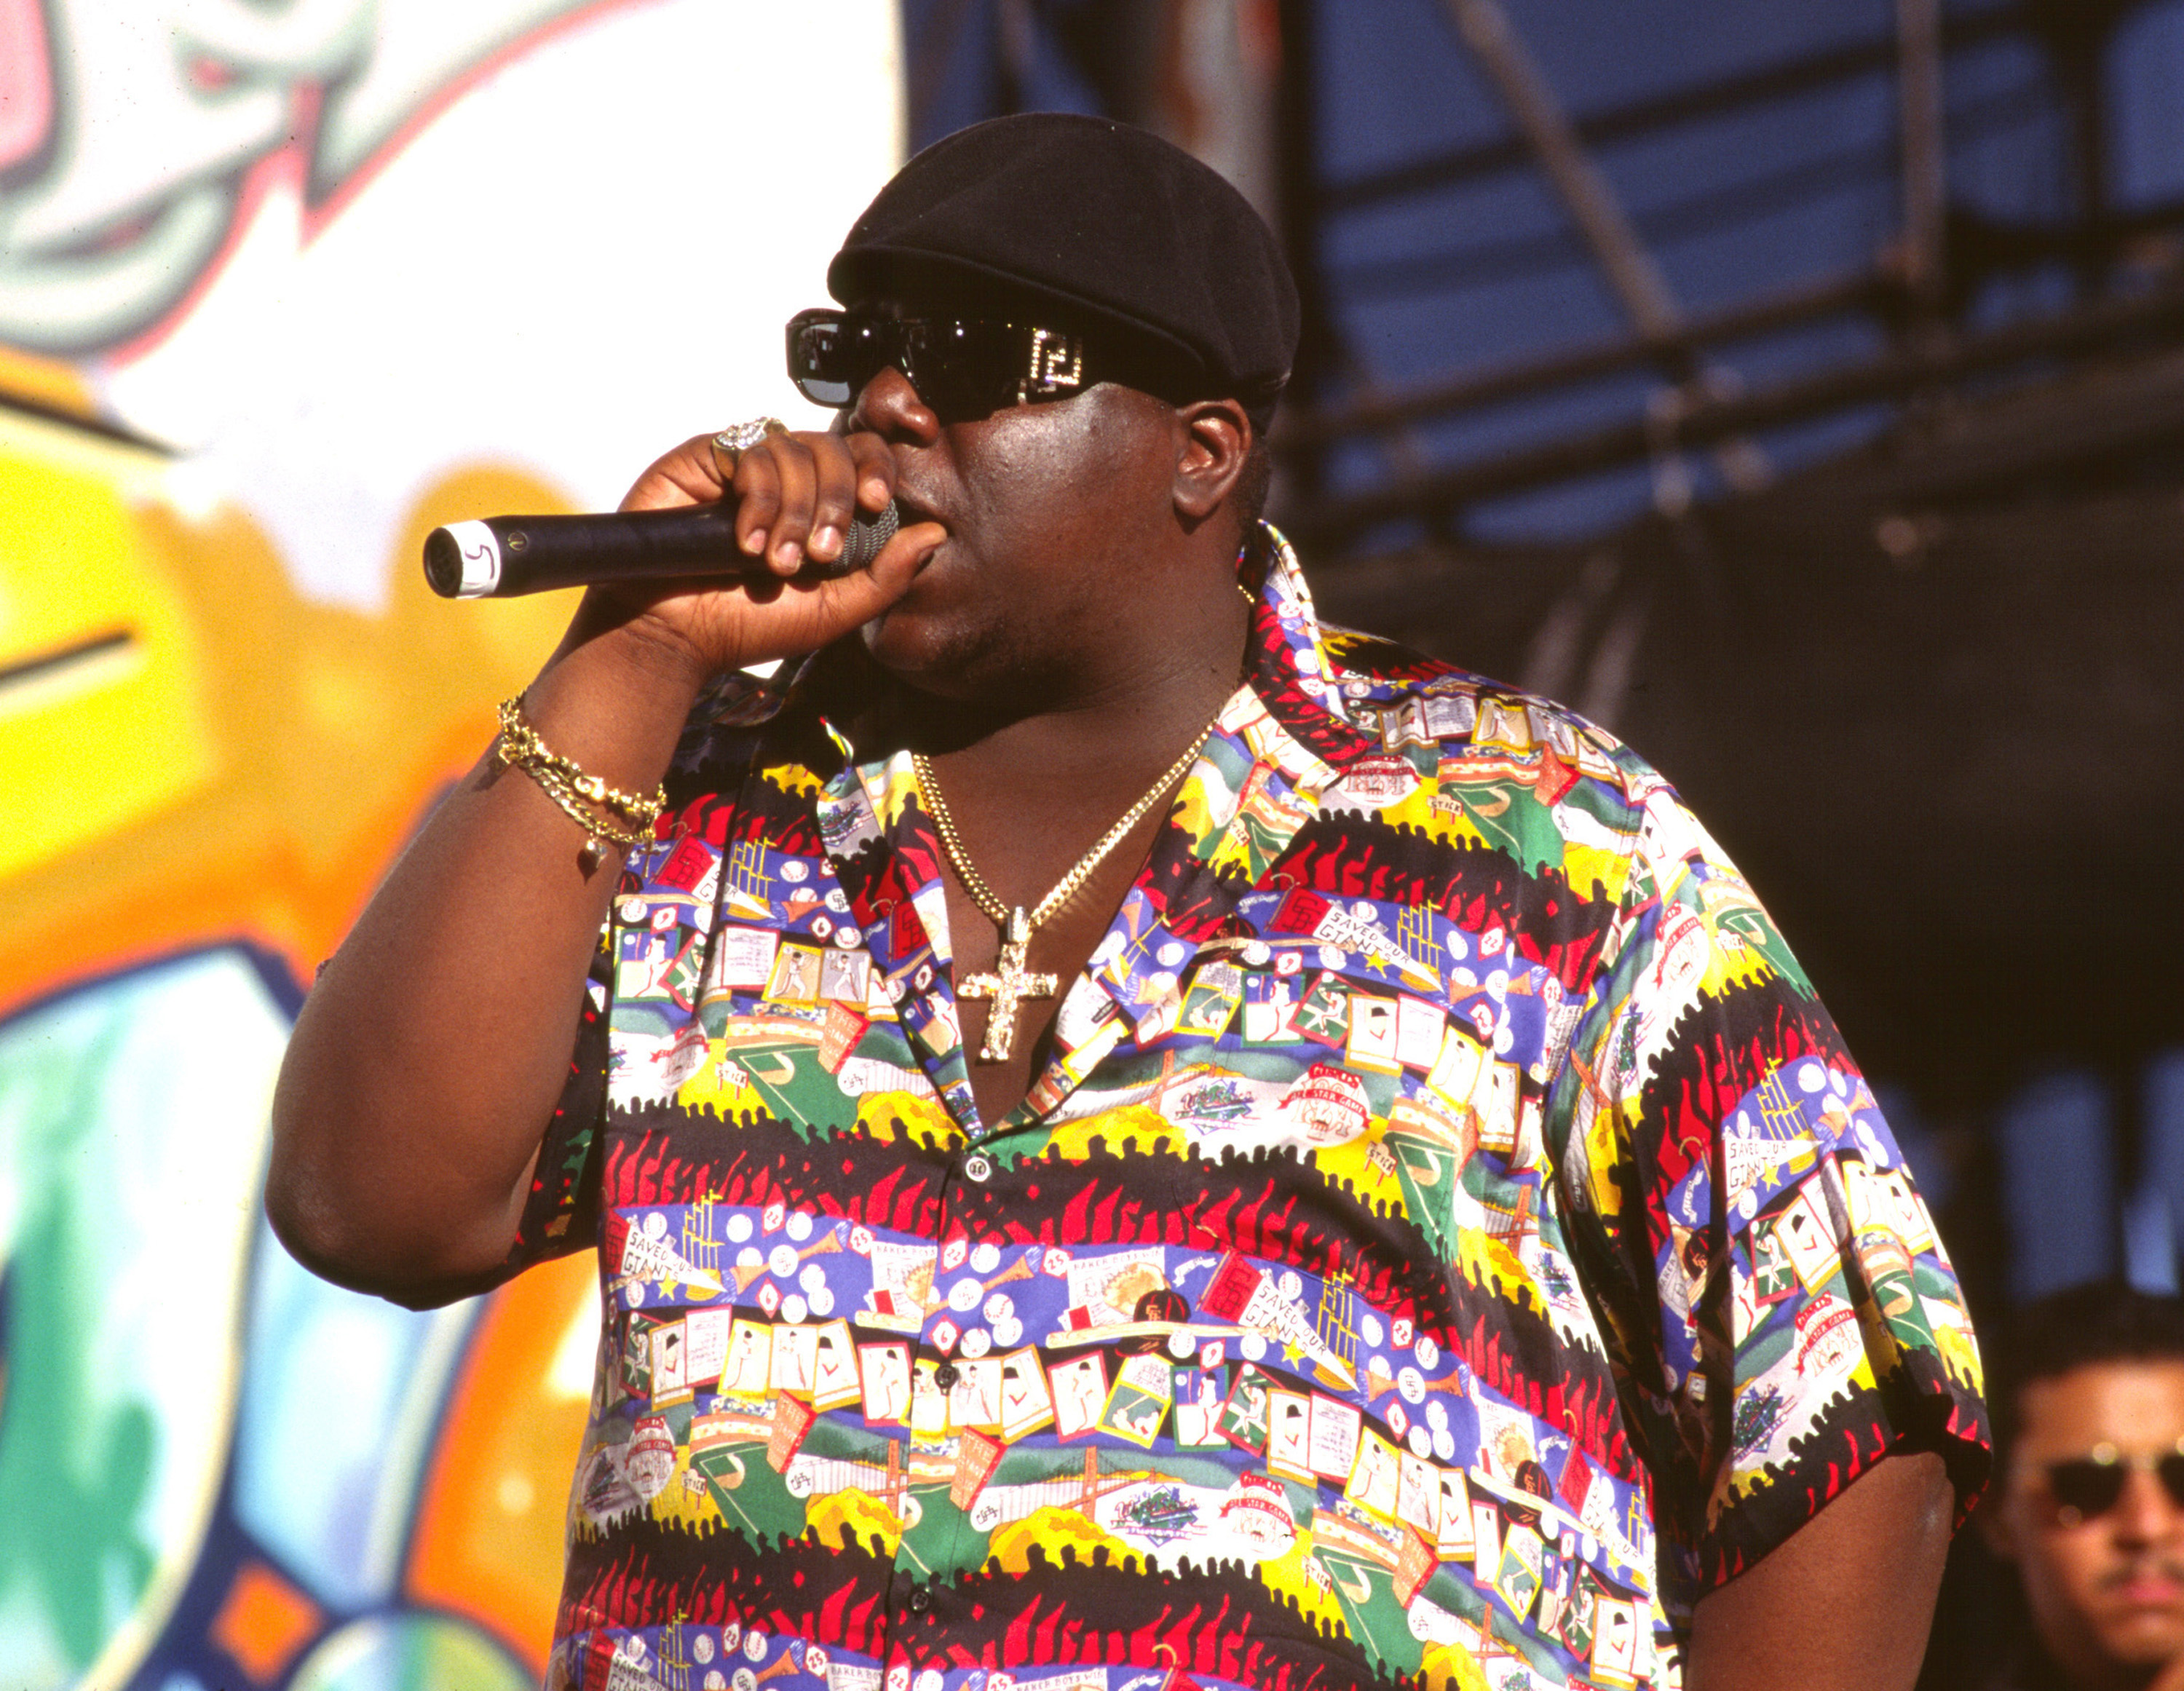 The Notorious B.I.G., who had a son in 1996 before his death, performing on stage in a colorful shirt